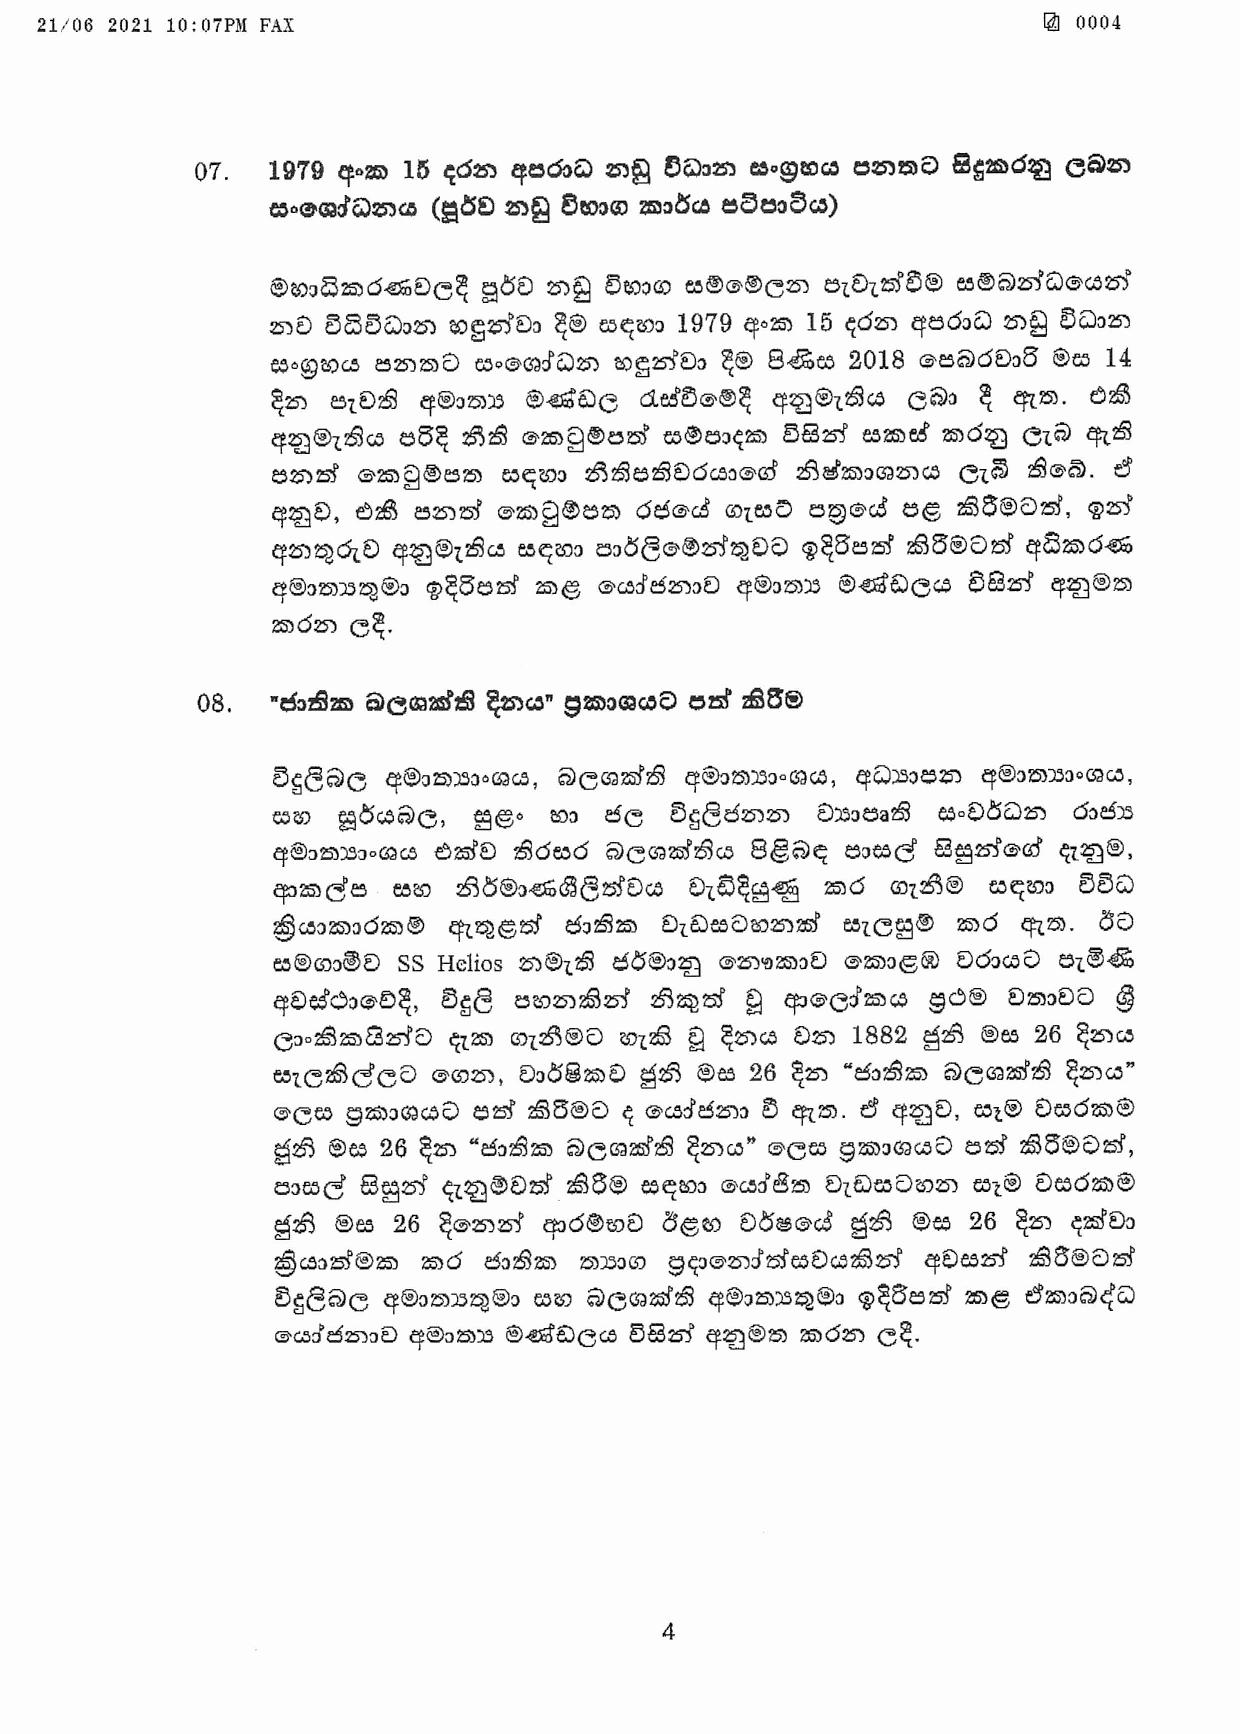 Cabinet Decision on 21.06.2021 page 001